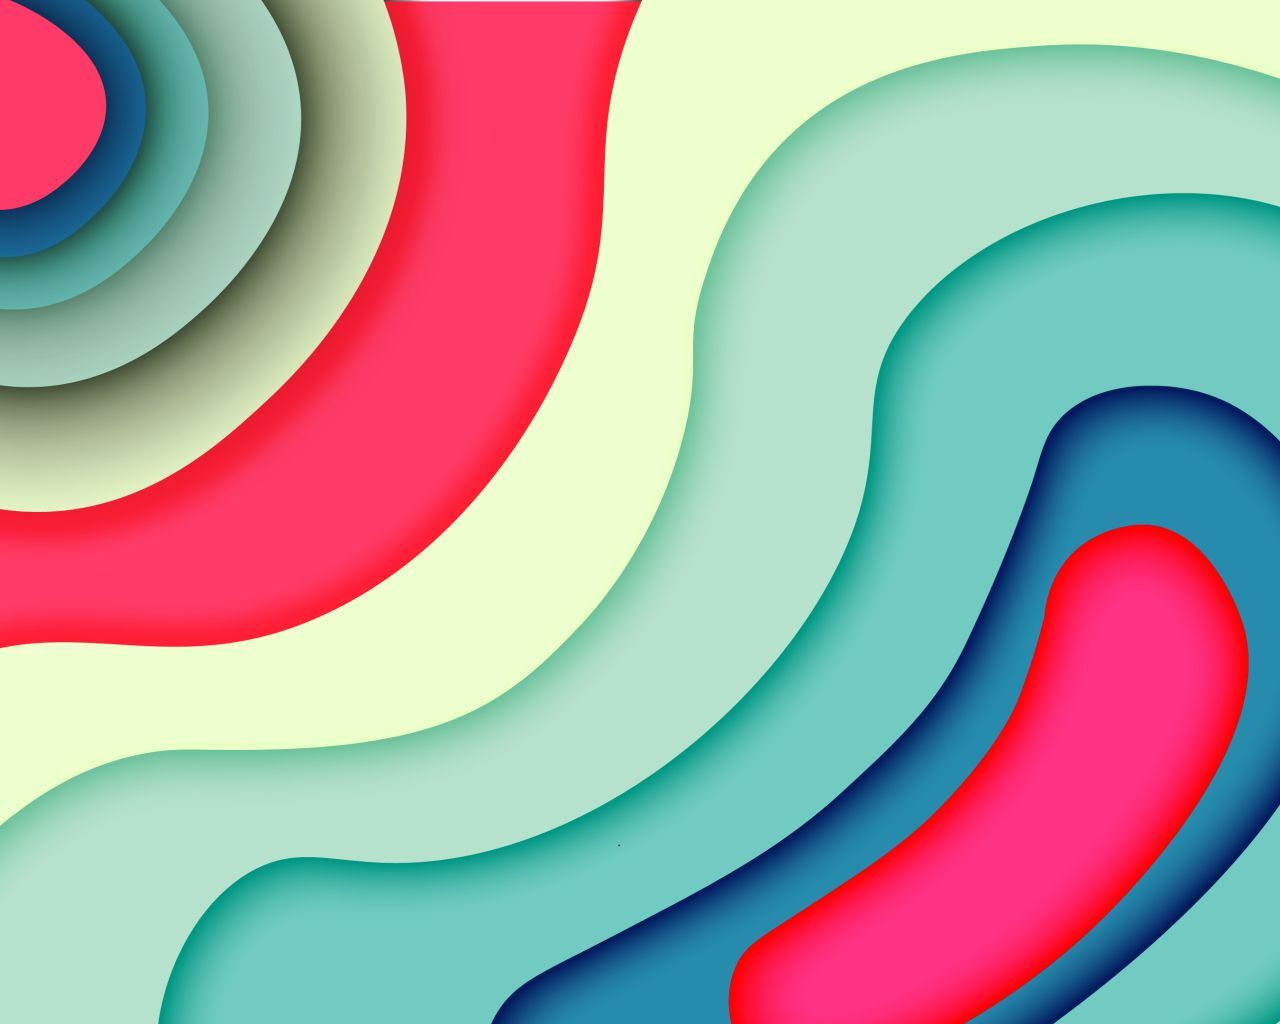 A colorful abstract design with blue, red and pink - 1280x1024